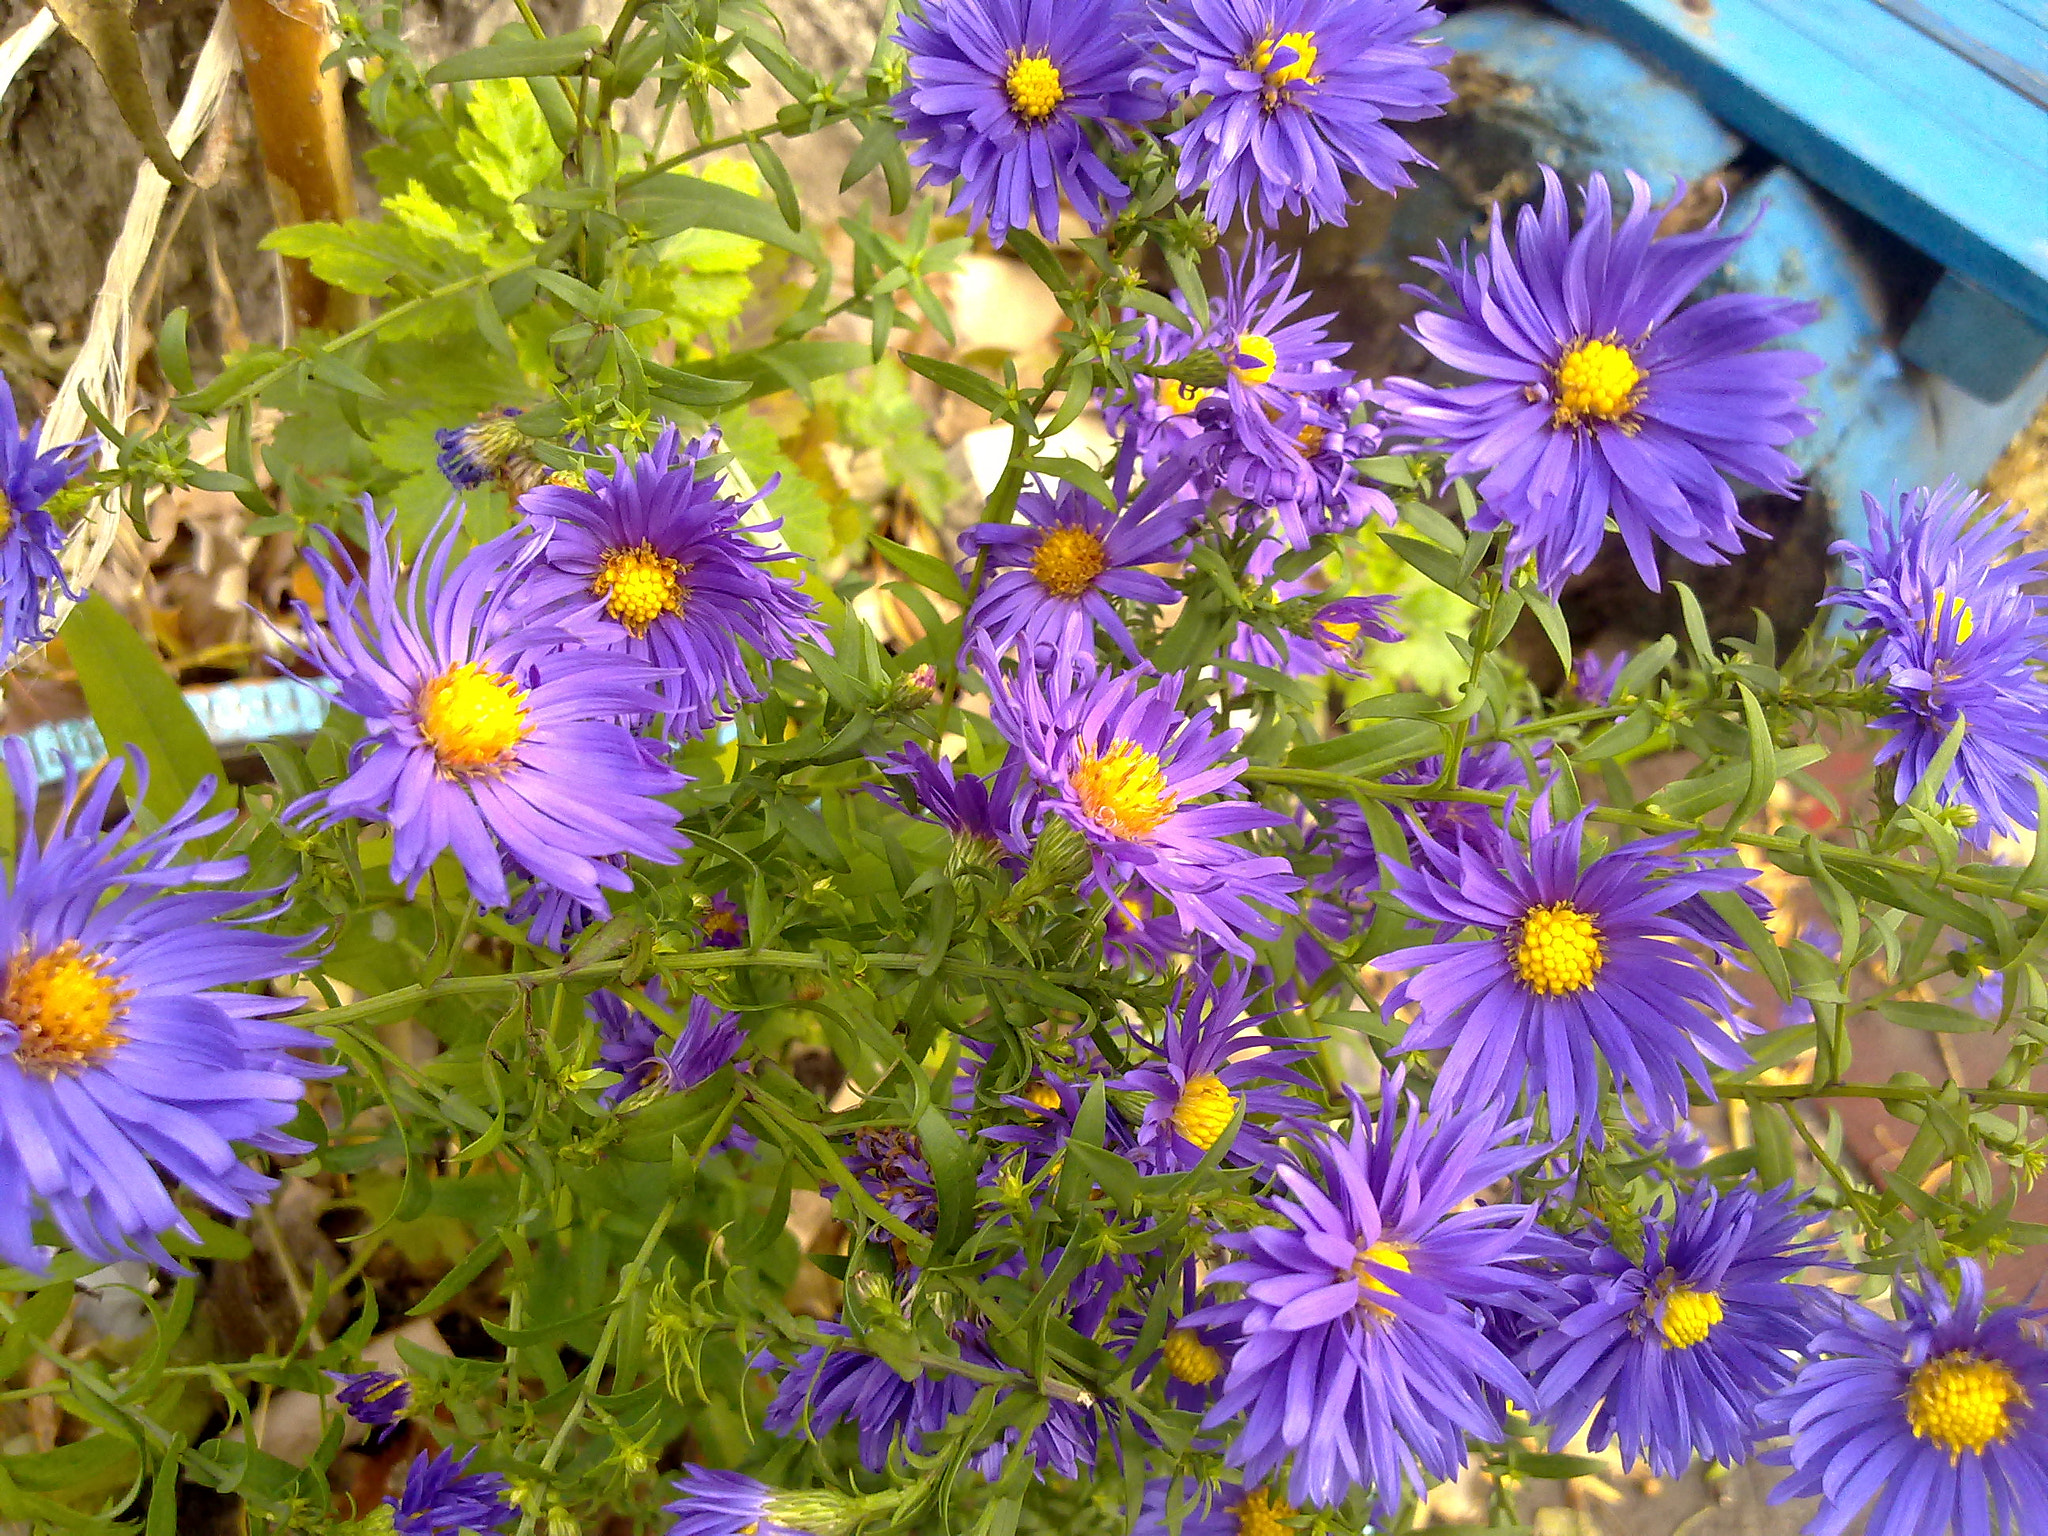 Nokia N97 sample photo. Violet flovers photography